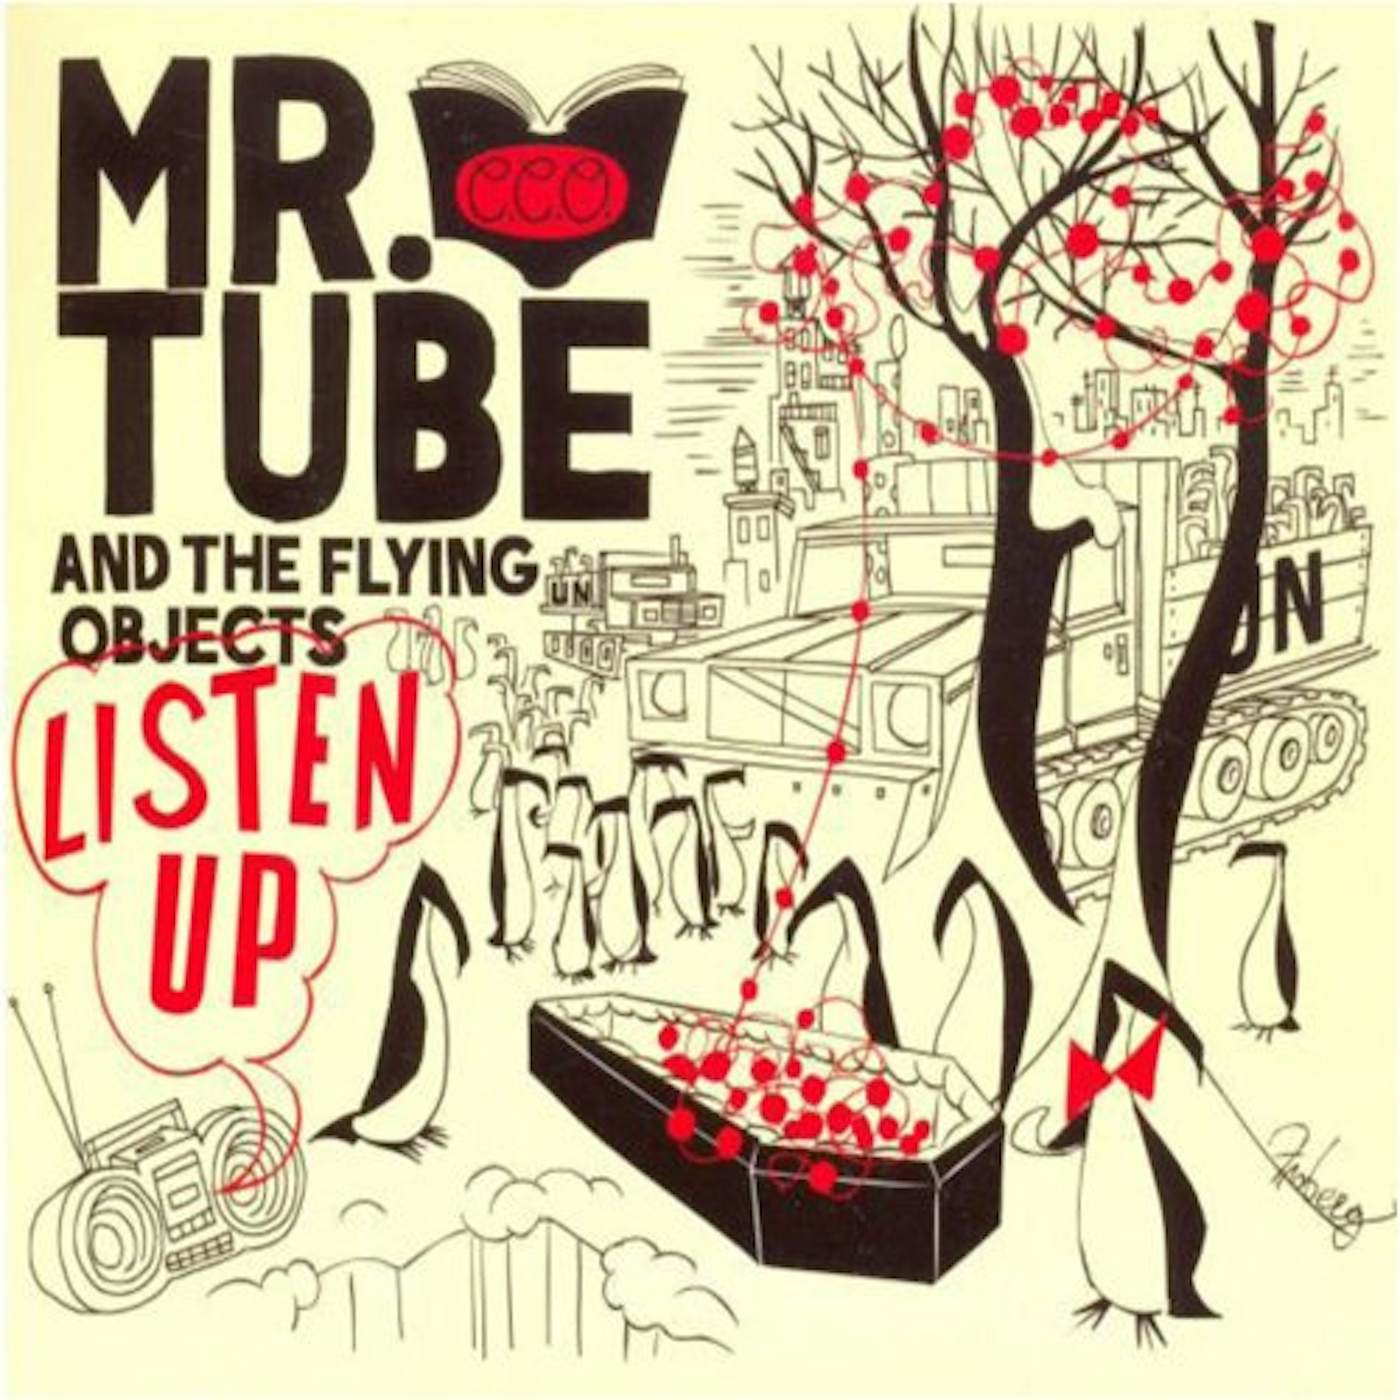 Mr. Tube and the Flying Objects Listen Up Vinyl Record